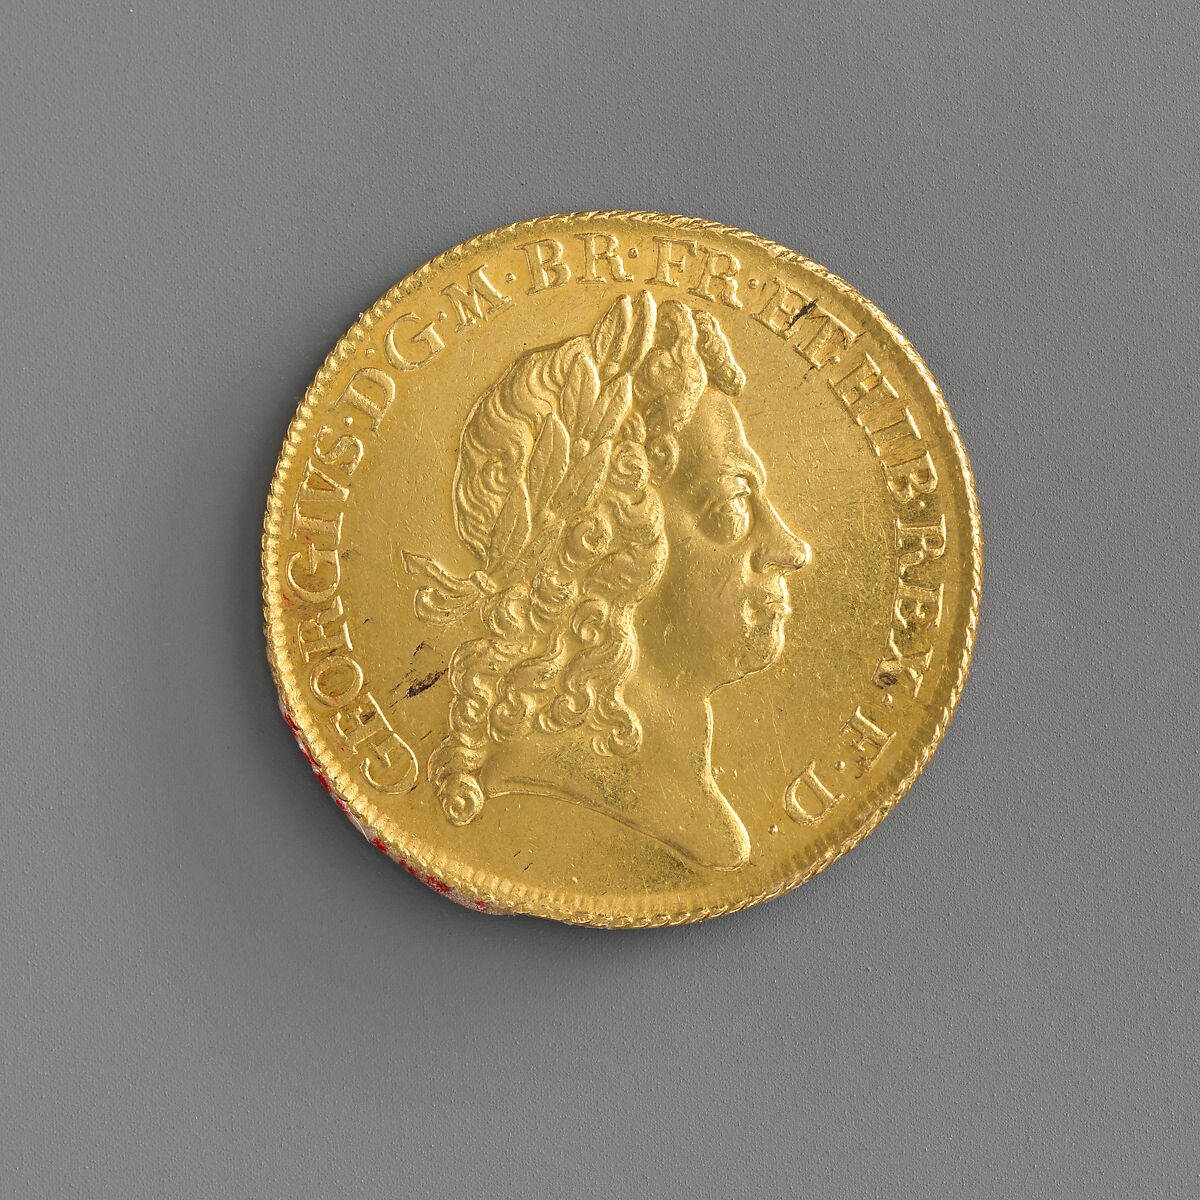 Two guineas coin of George I. 